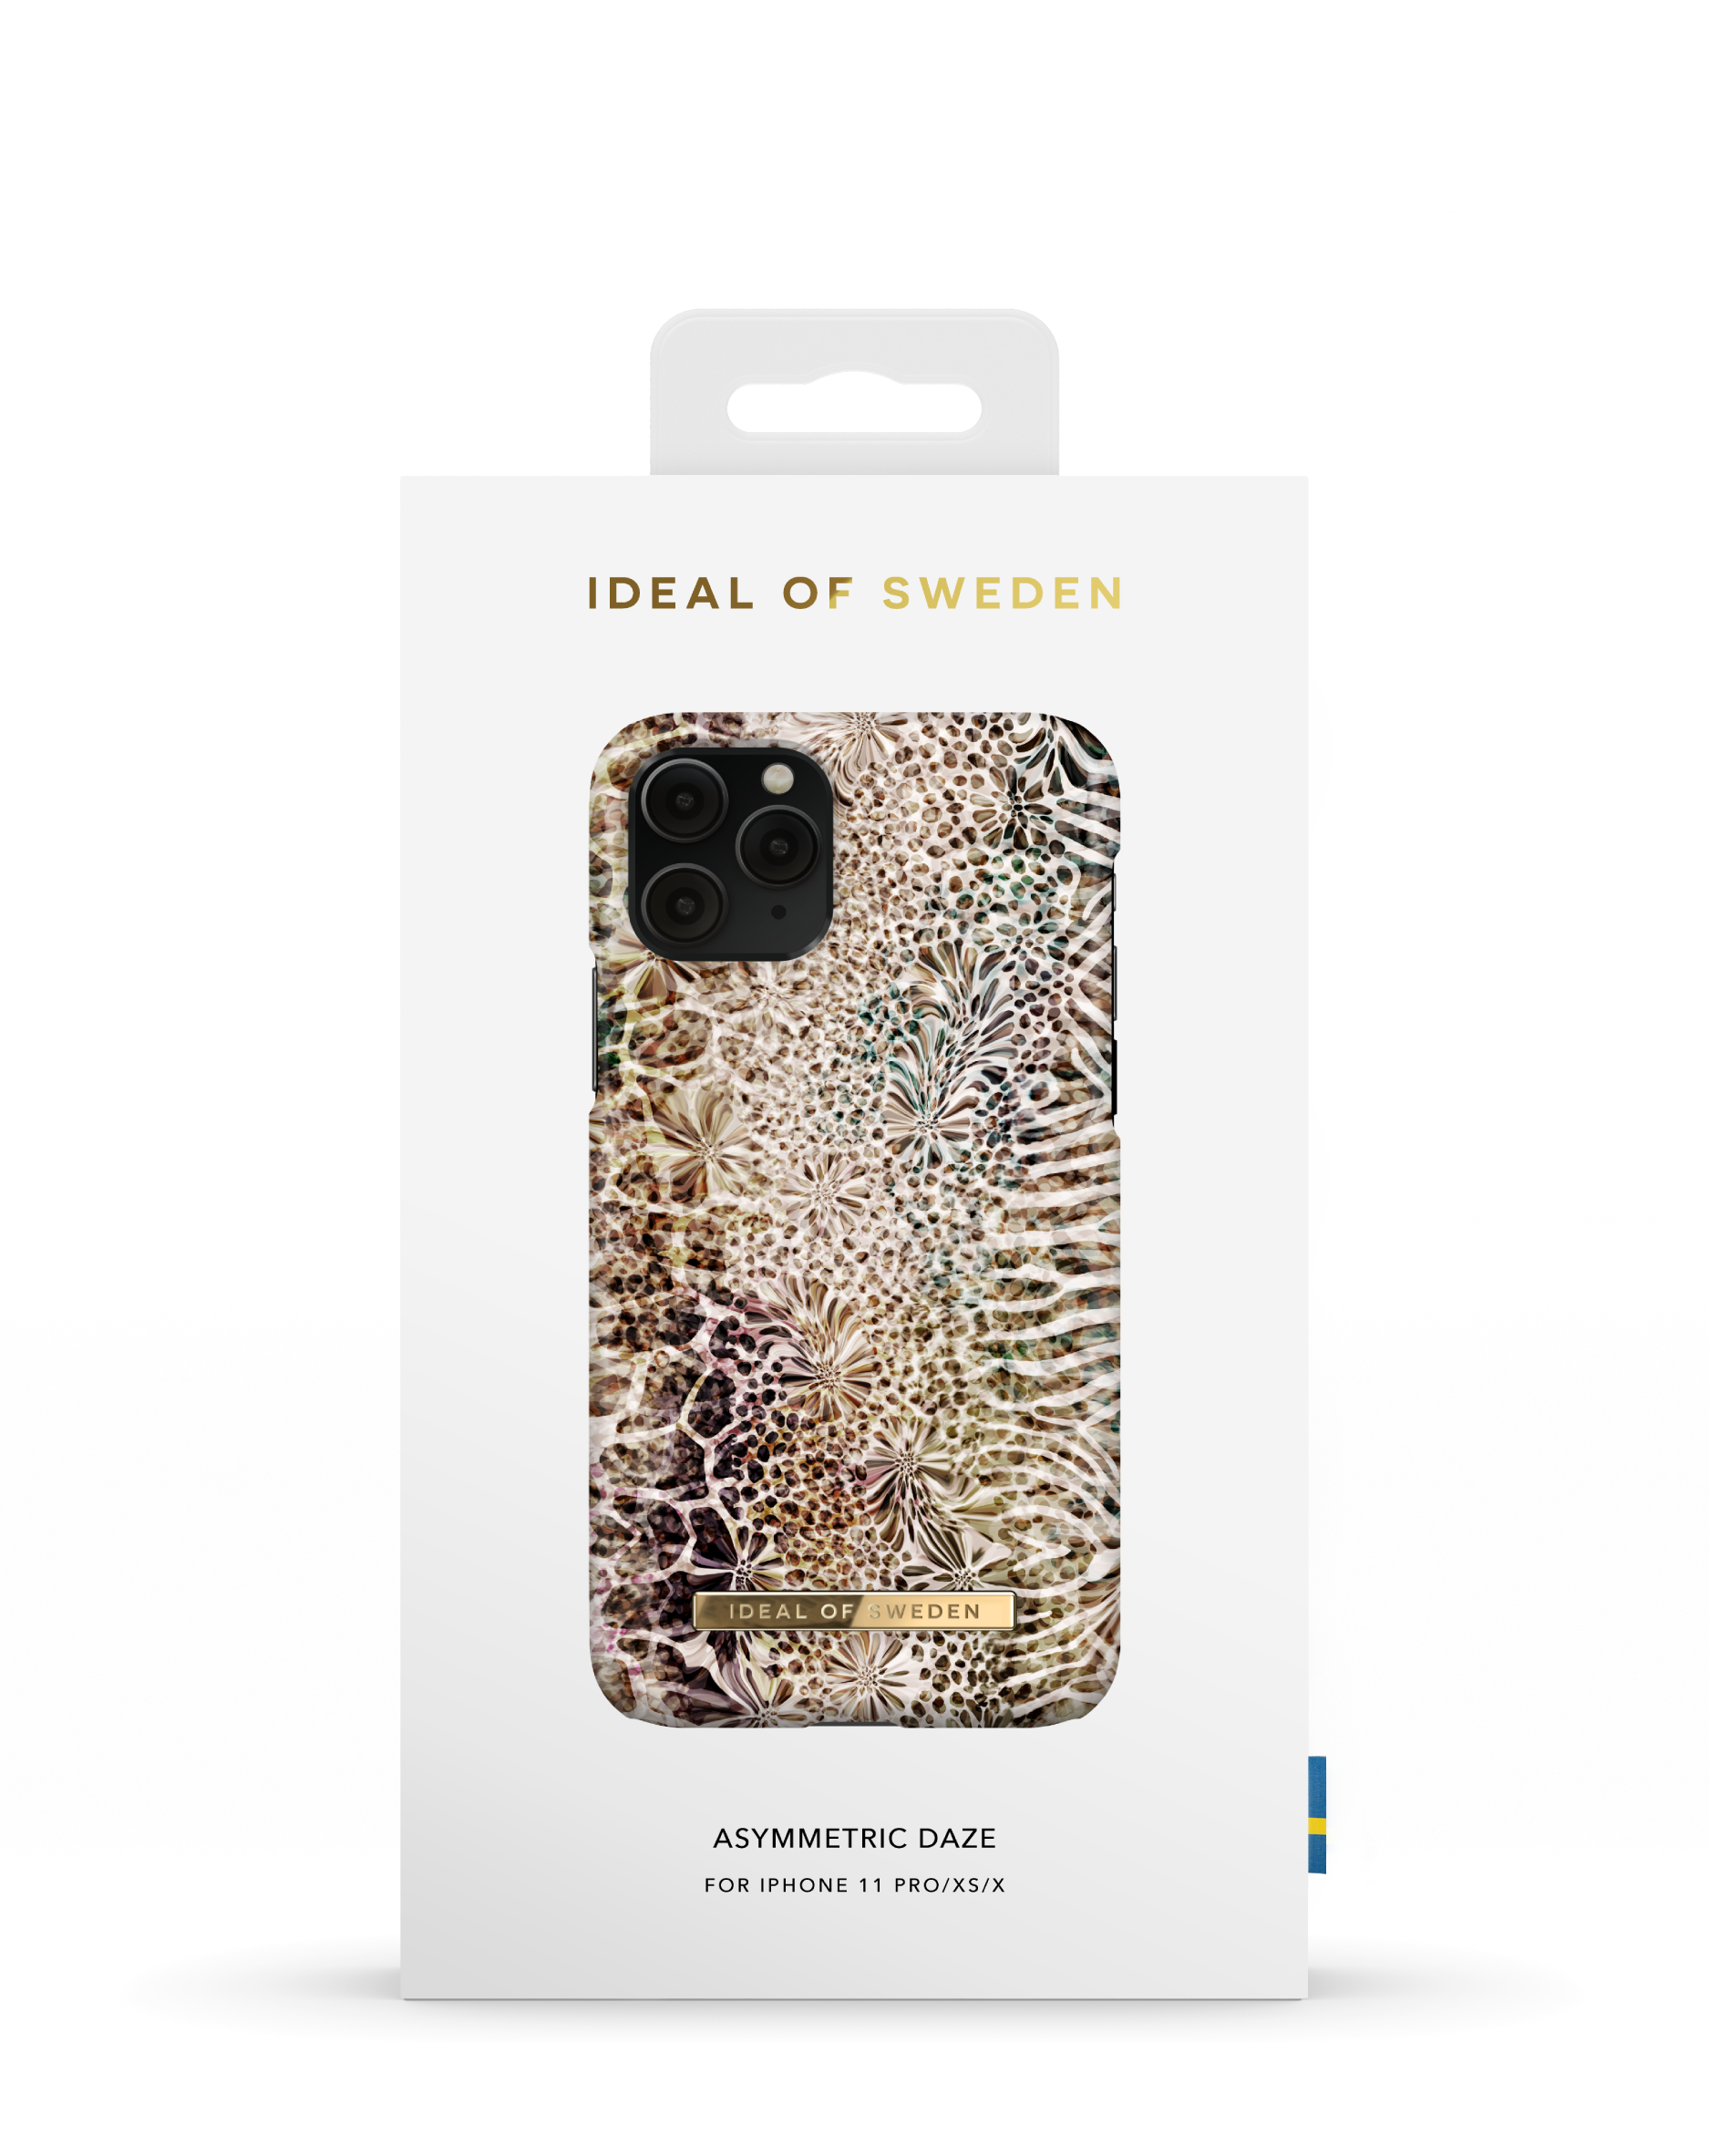 Daze SWEDEN Assymetric XS, X, iPhone 11 Backcover, Apple, Pro, IDFCSS20-I1958-198, iPhone IDEAL Apple Apple Apple iPhone OF